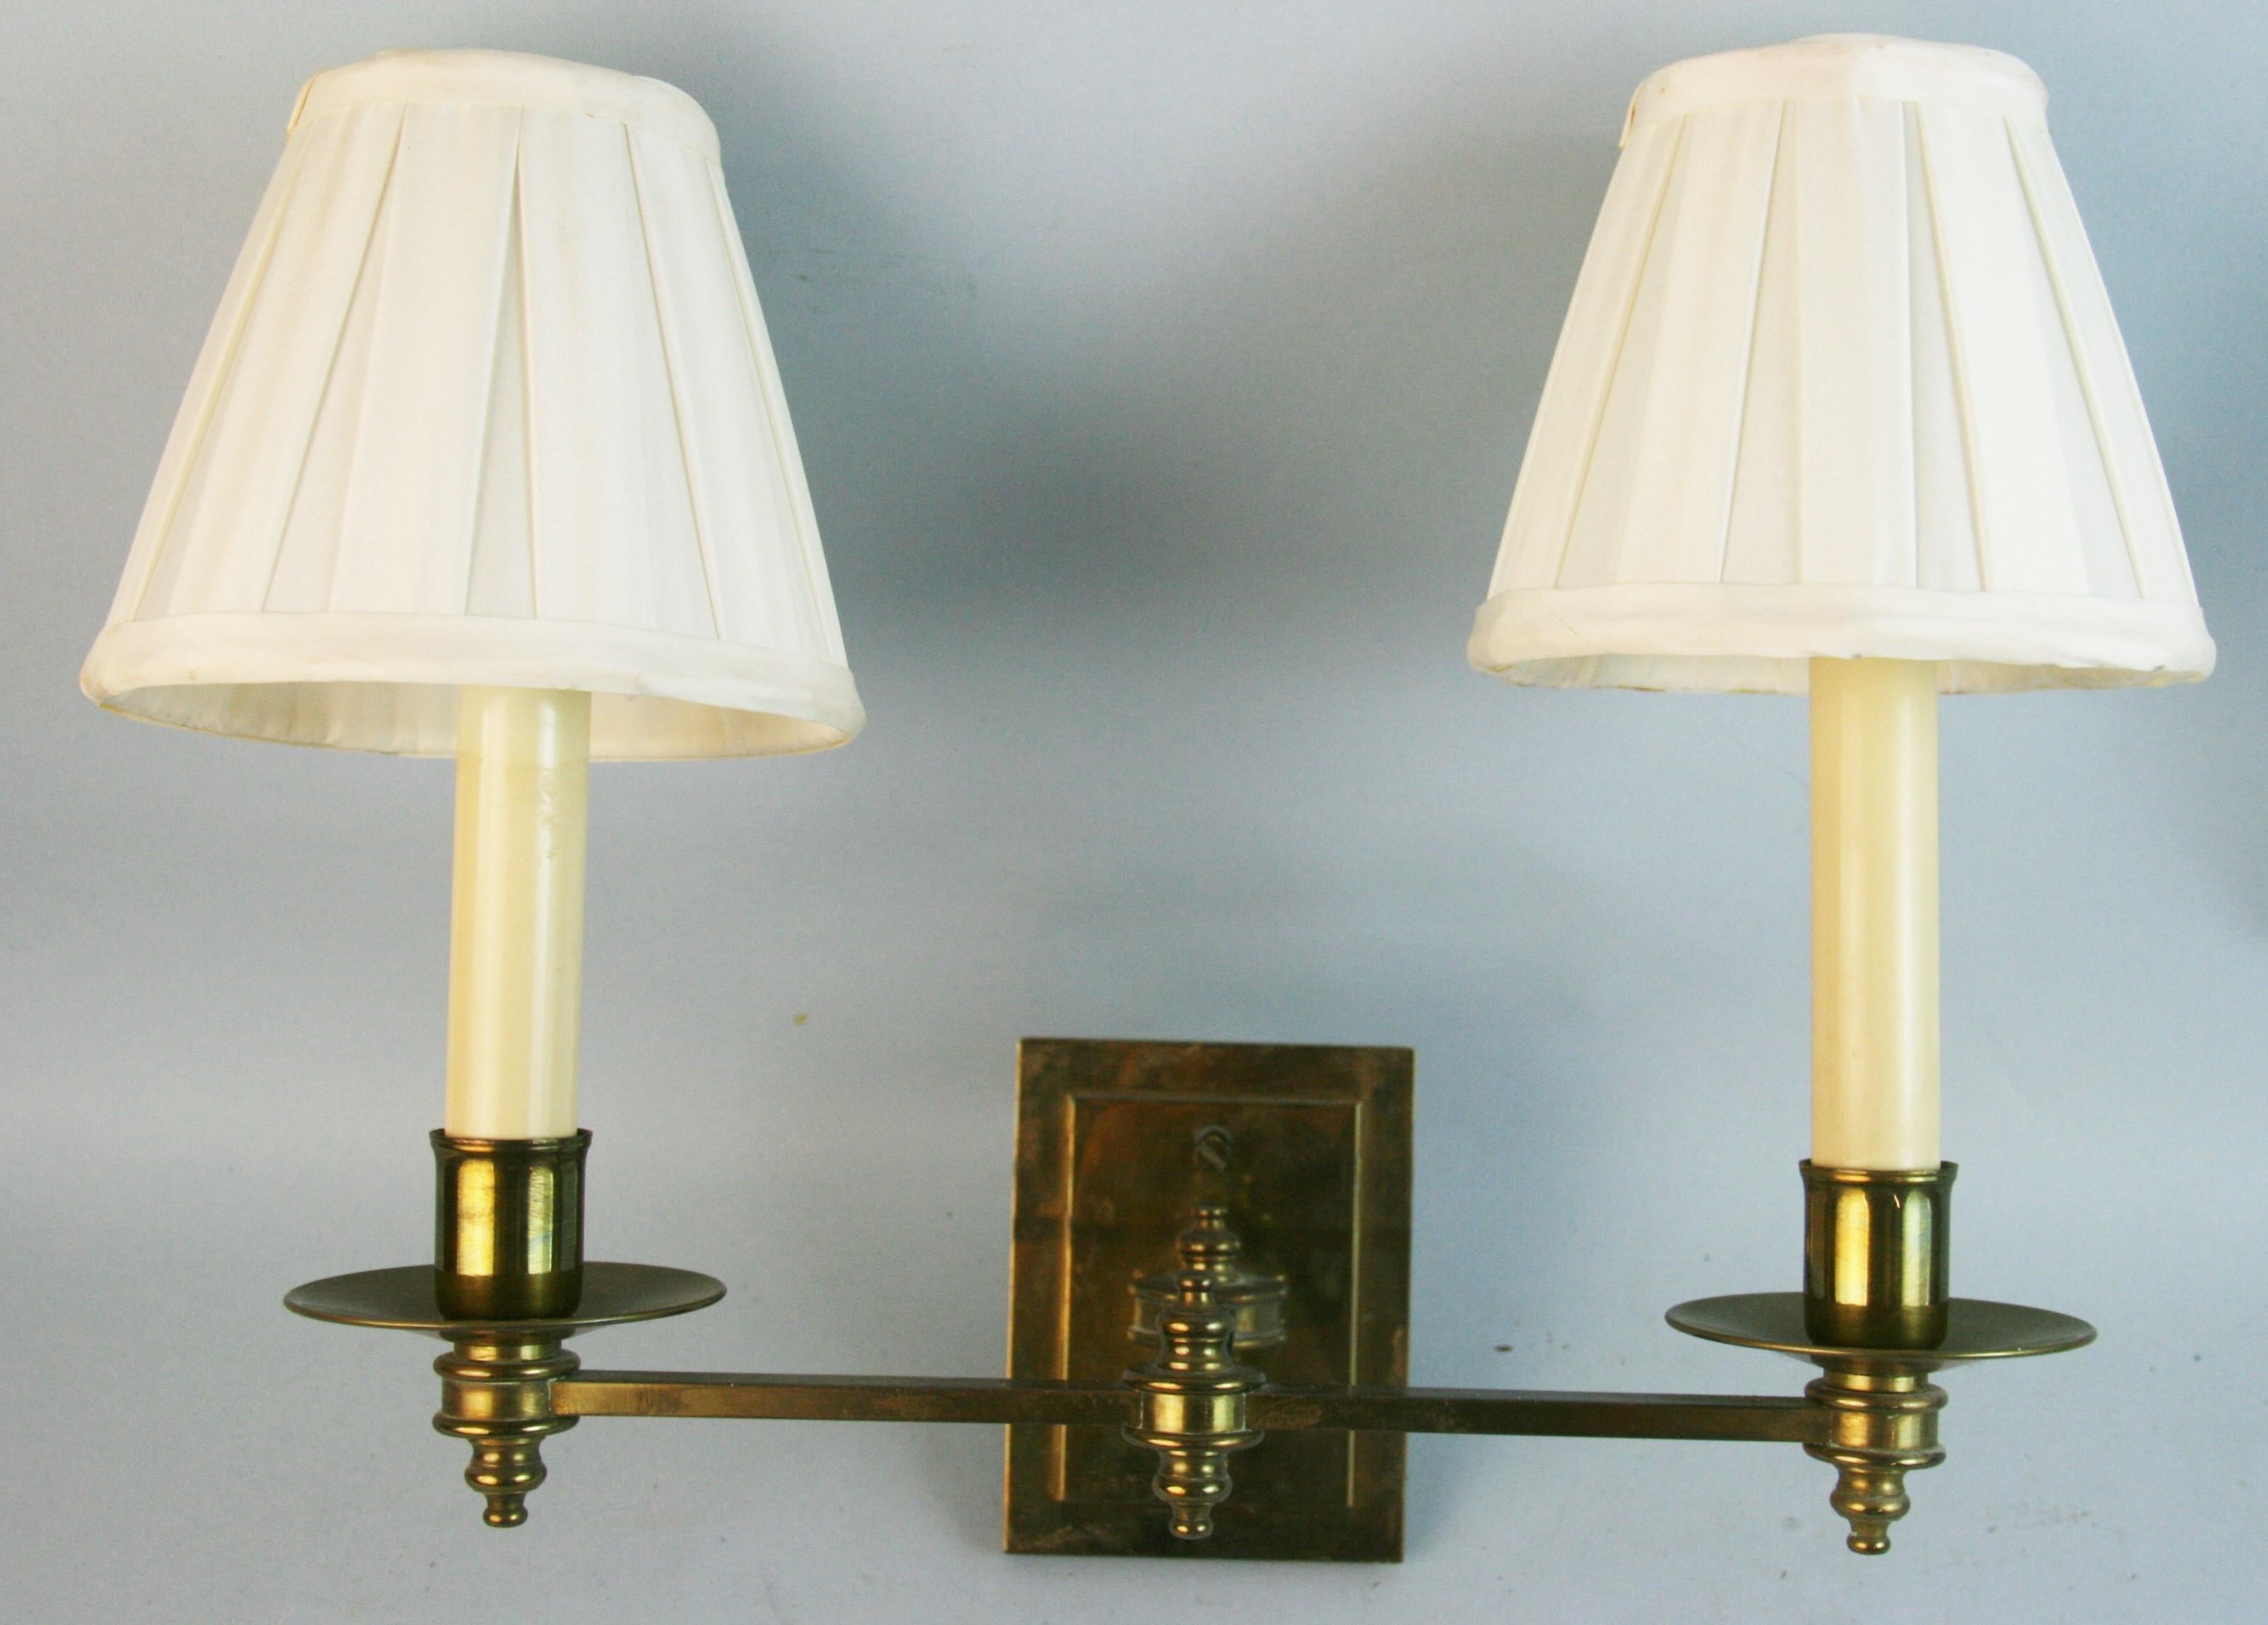 1454 Pair English 2 light sconces with pleated shades